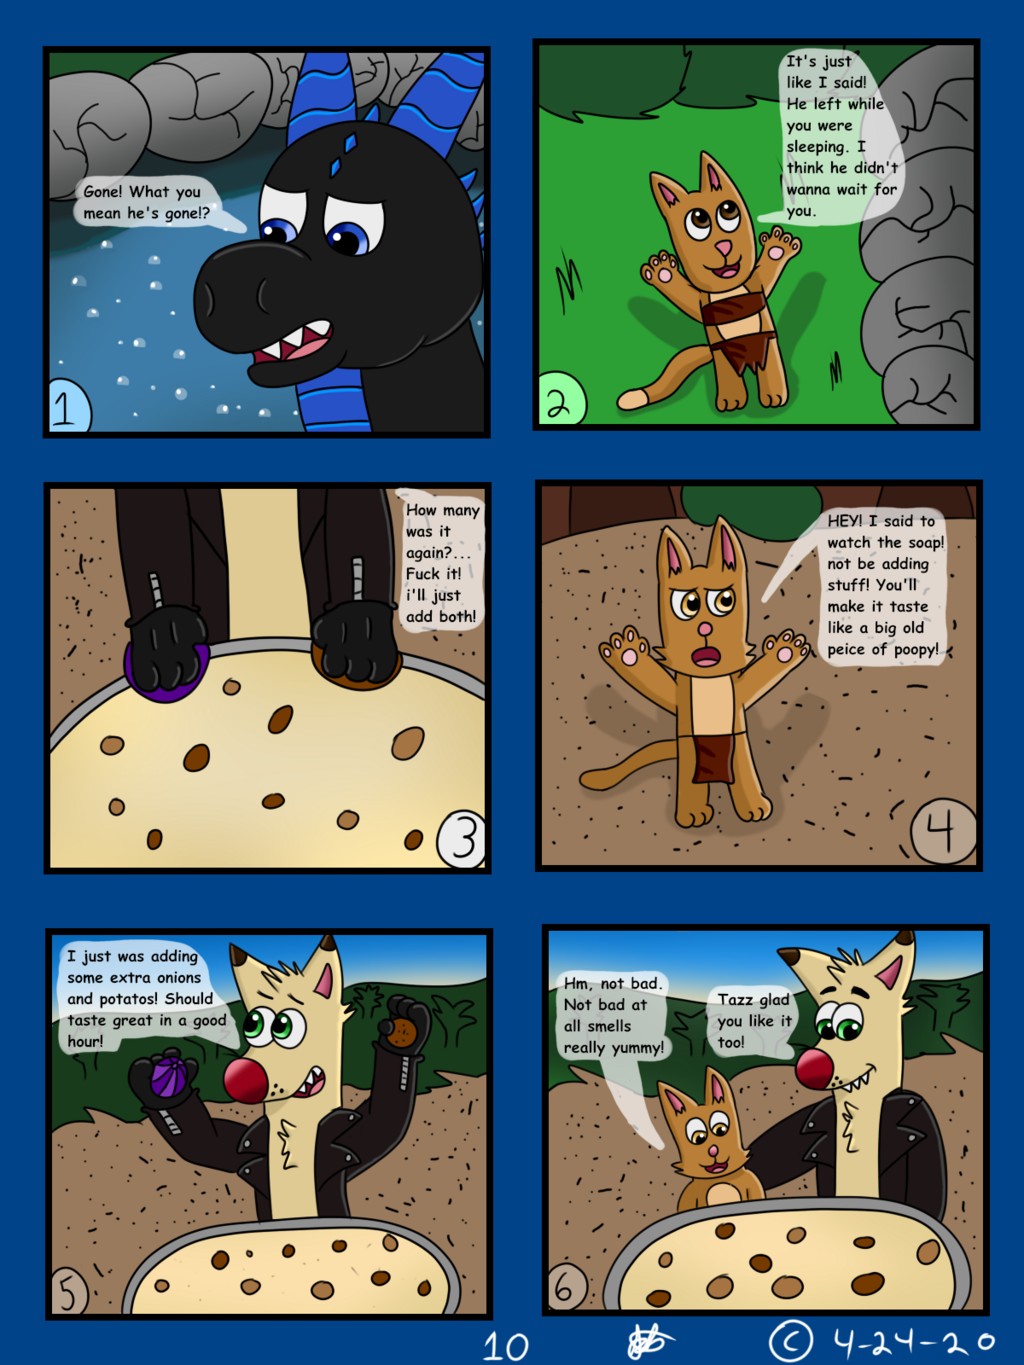 Tazzs story pg 10